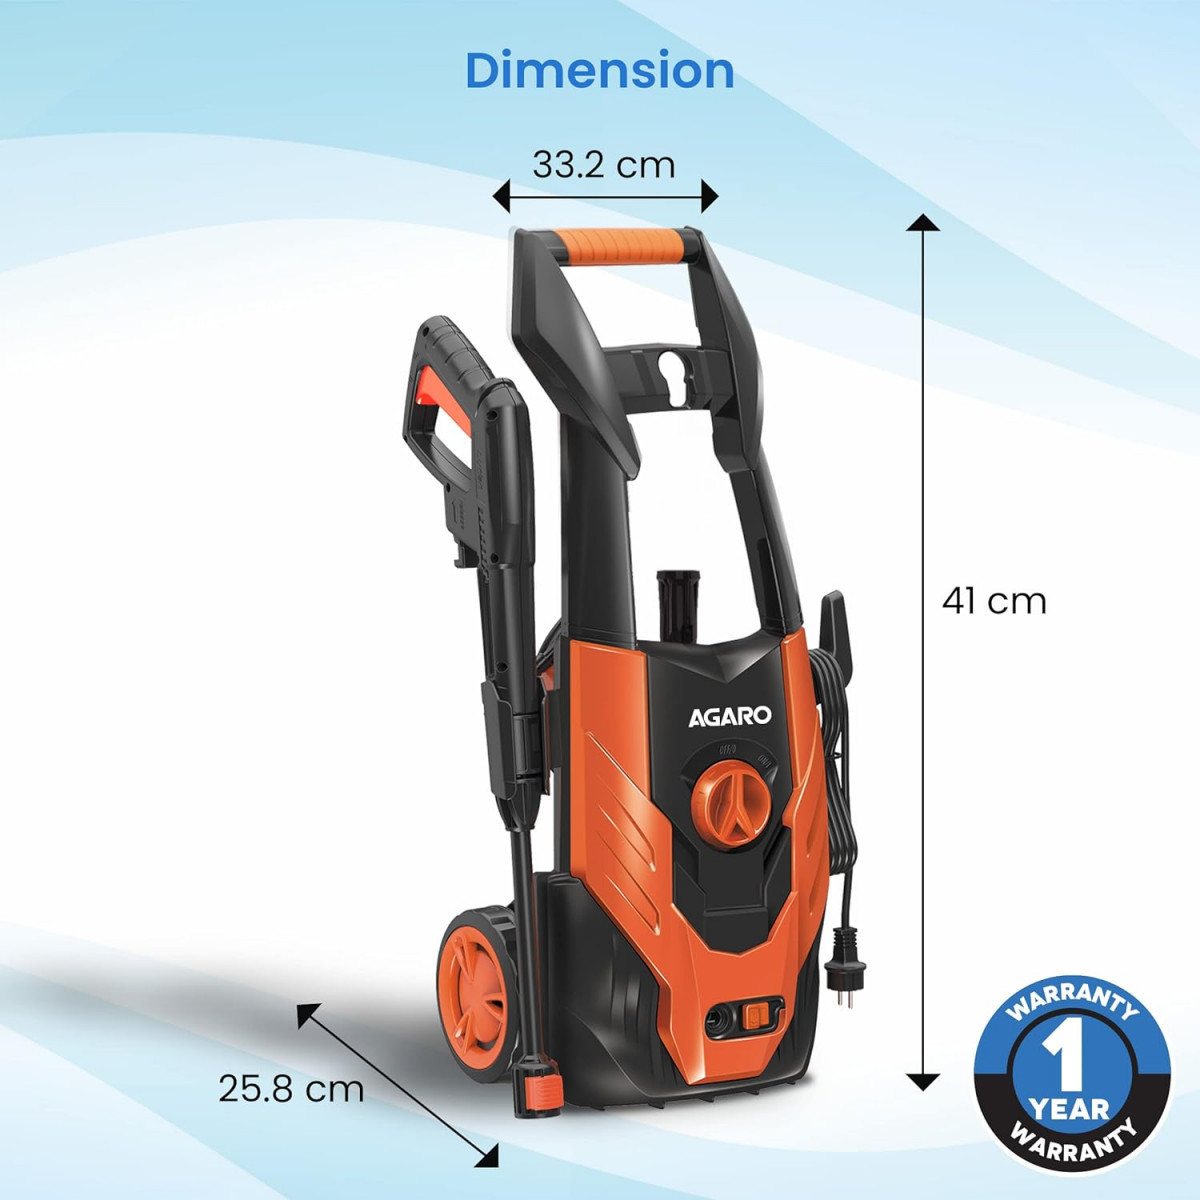 AGARO Grand High Pressure Washer 1500 Watts 110 Bars 65LMin Flow Rate 5 Meters Outlet HoseUpright Design with Wheel for CarBike and Home Cleaning Purpose Free Turbo Nozzle Black and Orange